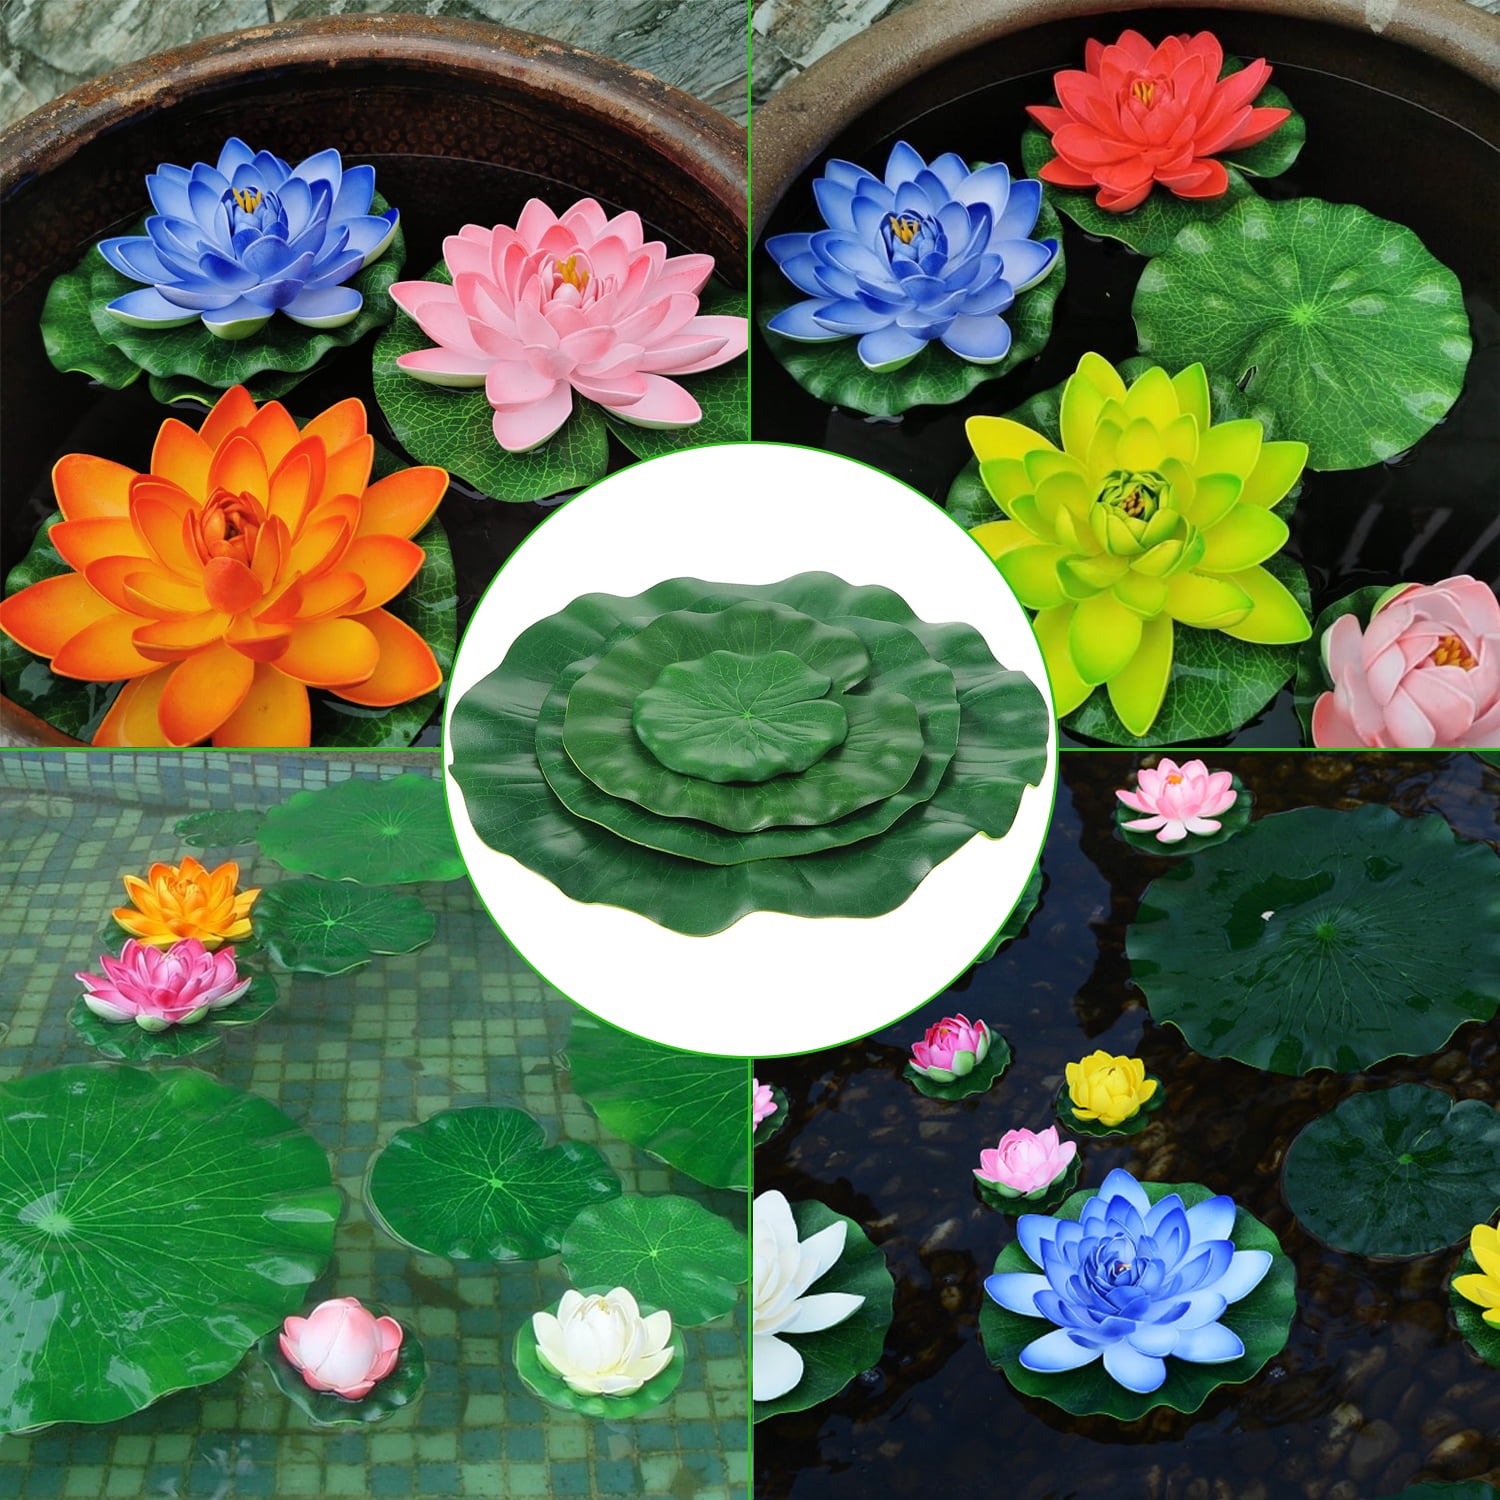 Details about   Pack Of 9 Artificial Floating Foam Lotus Leaves Water Lily Pads Ornaments Gr J2